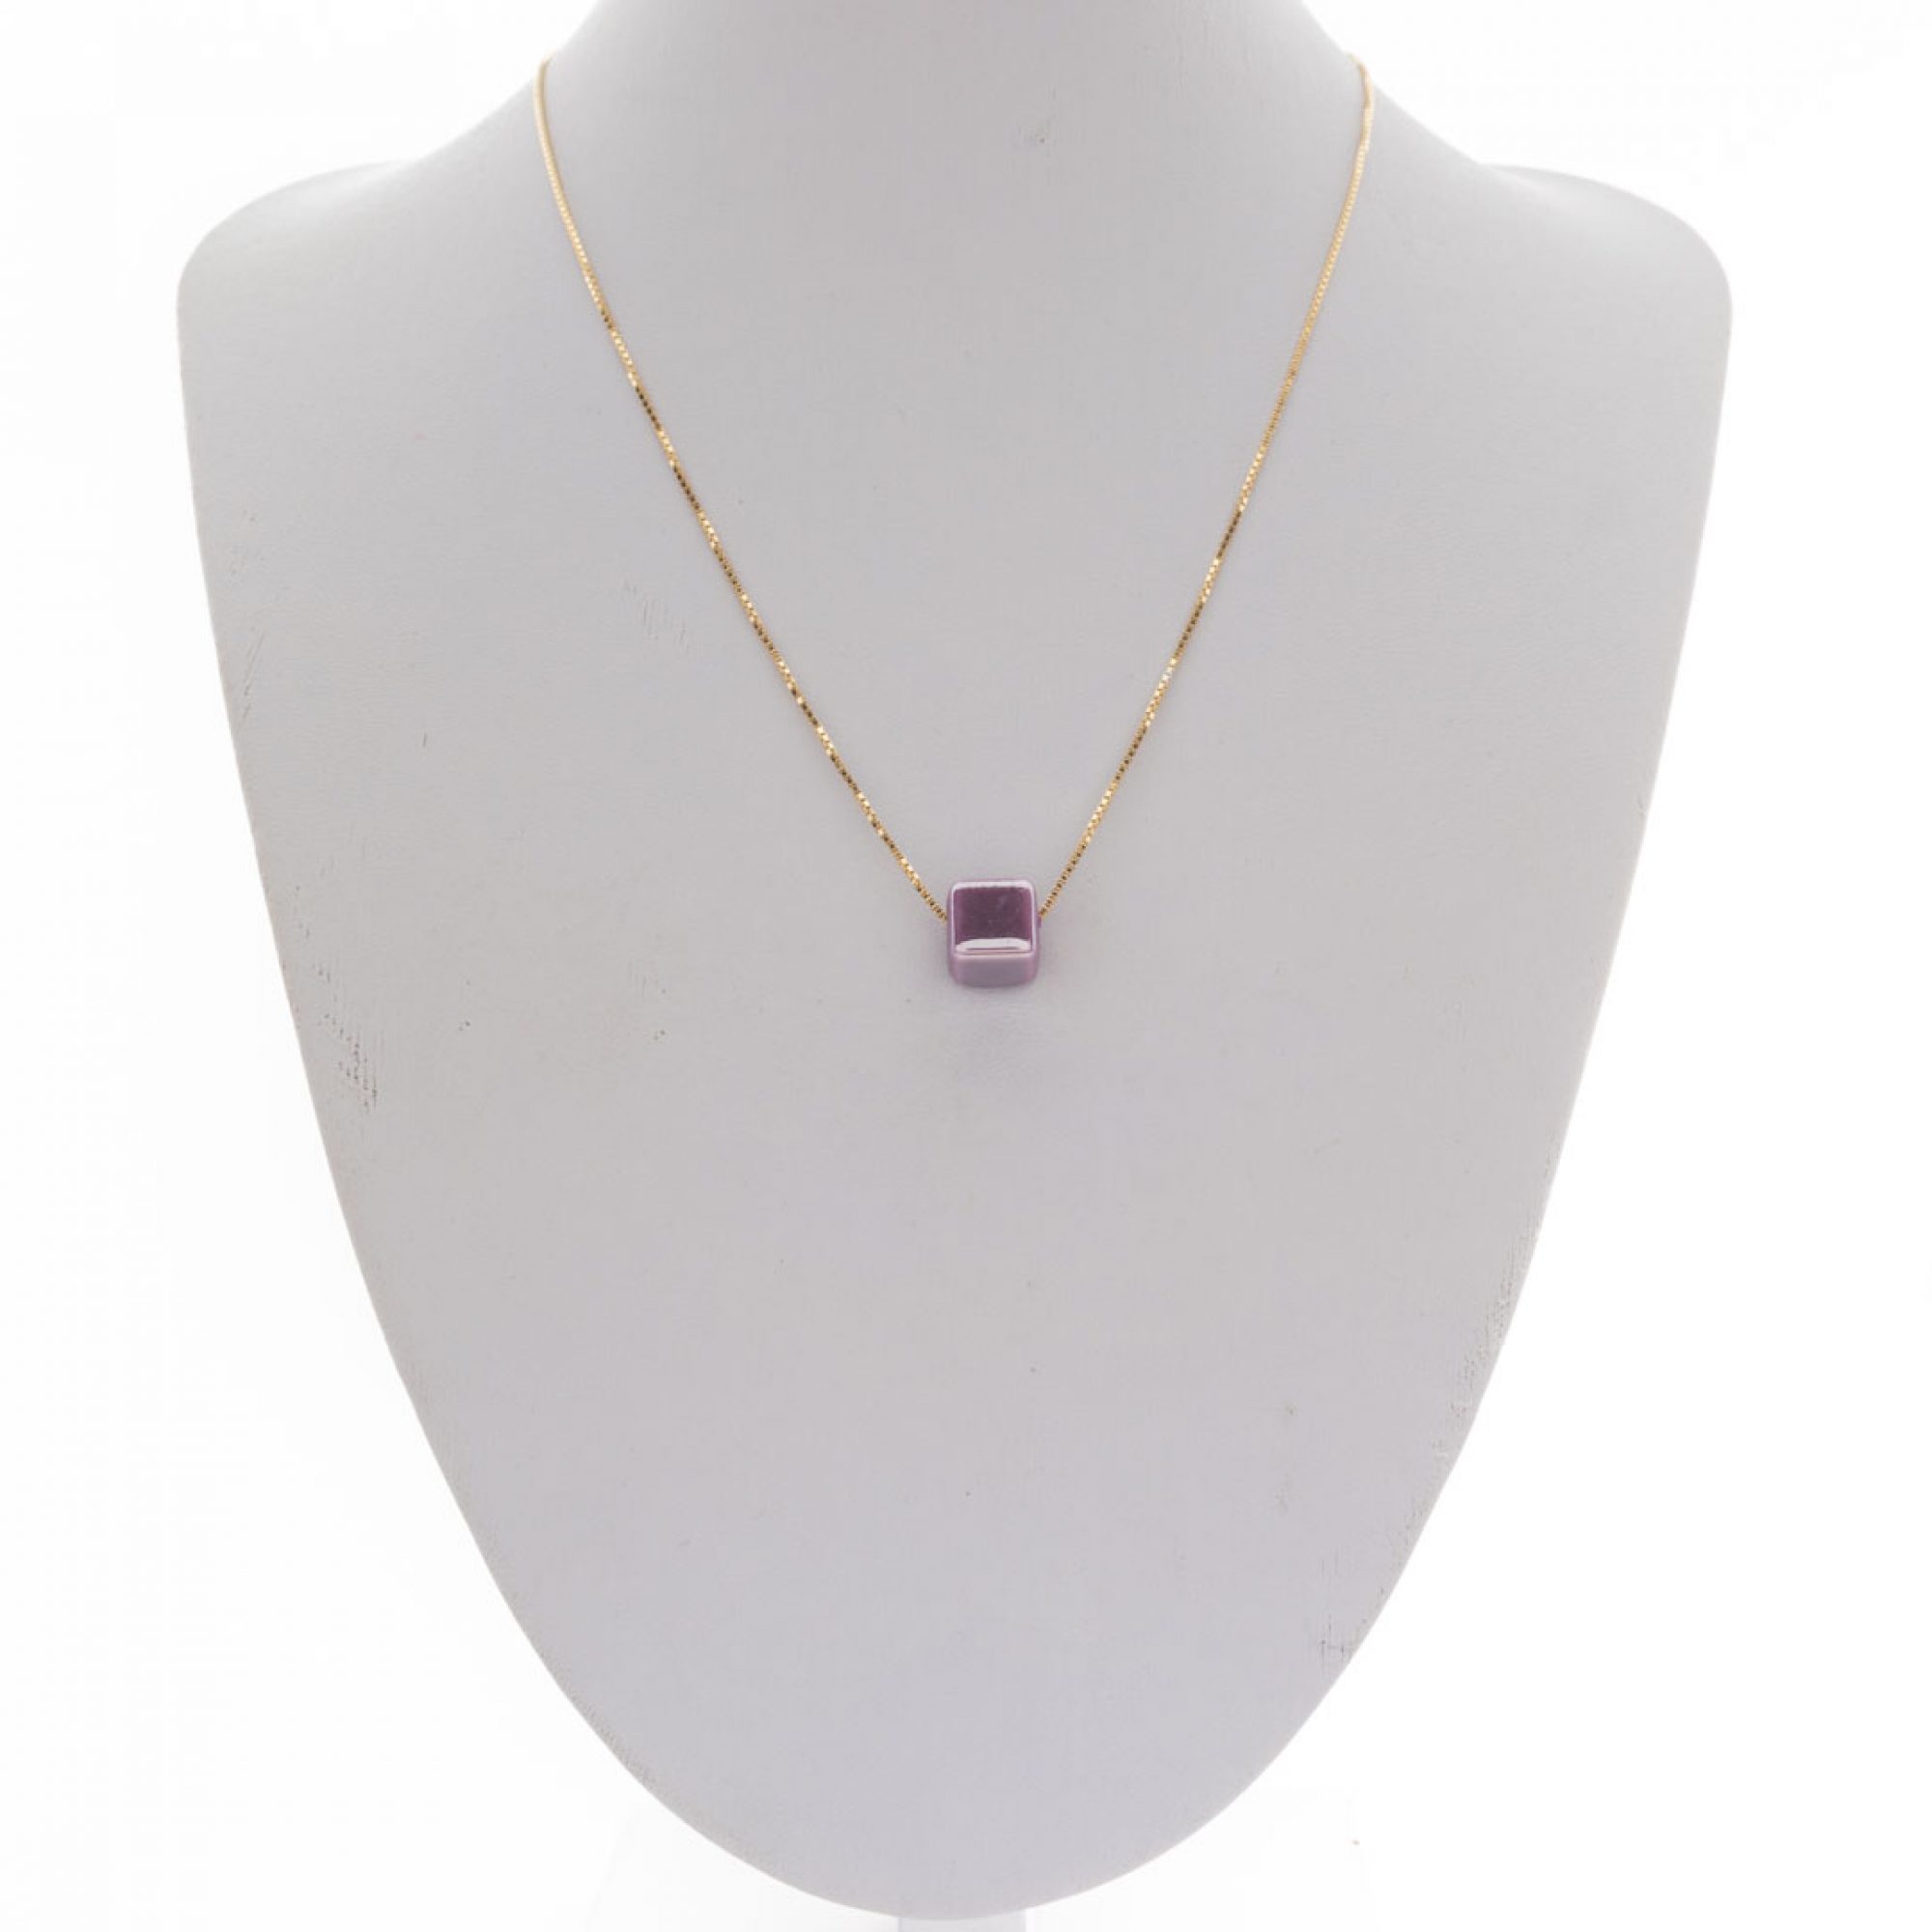 Gold plated purple bead necklace